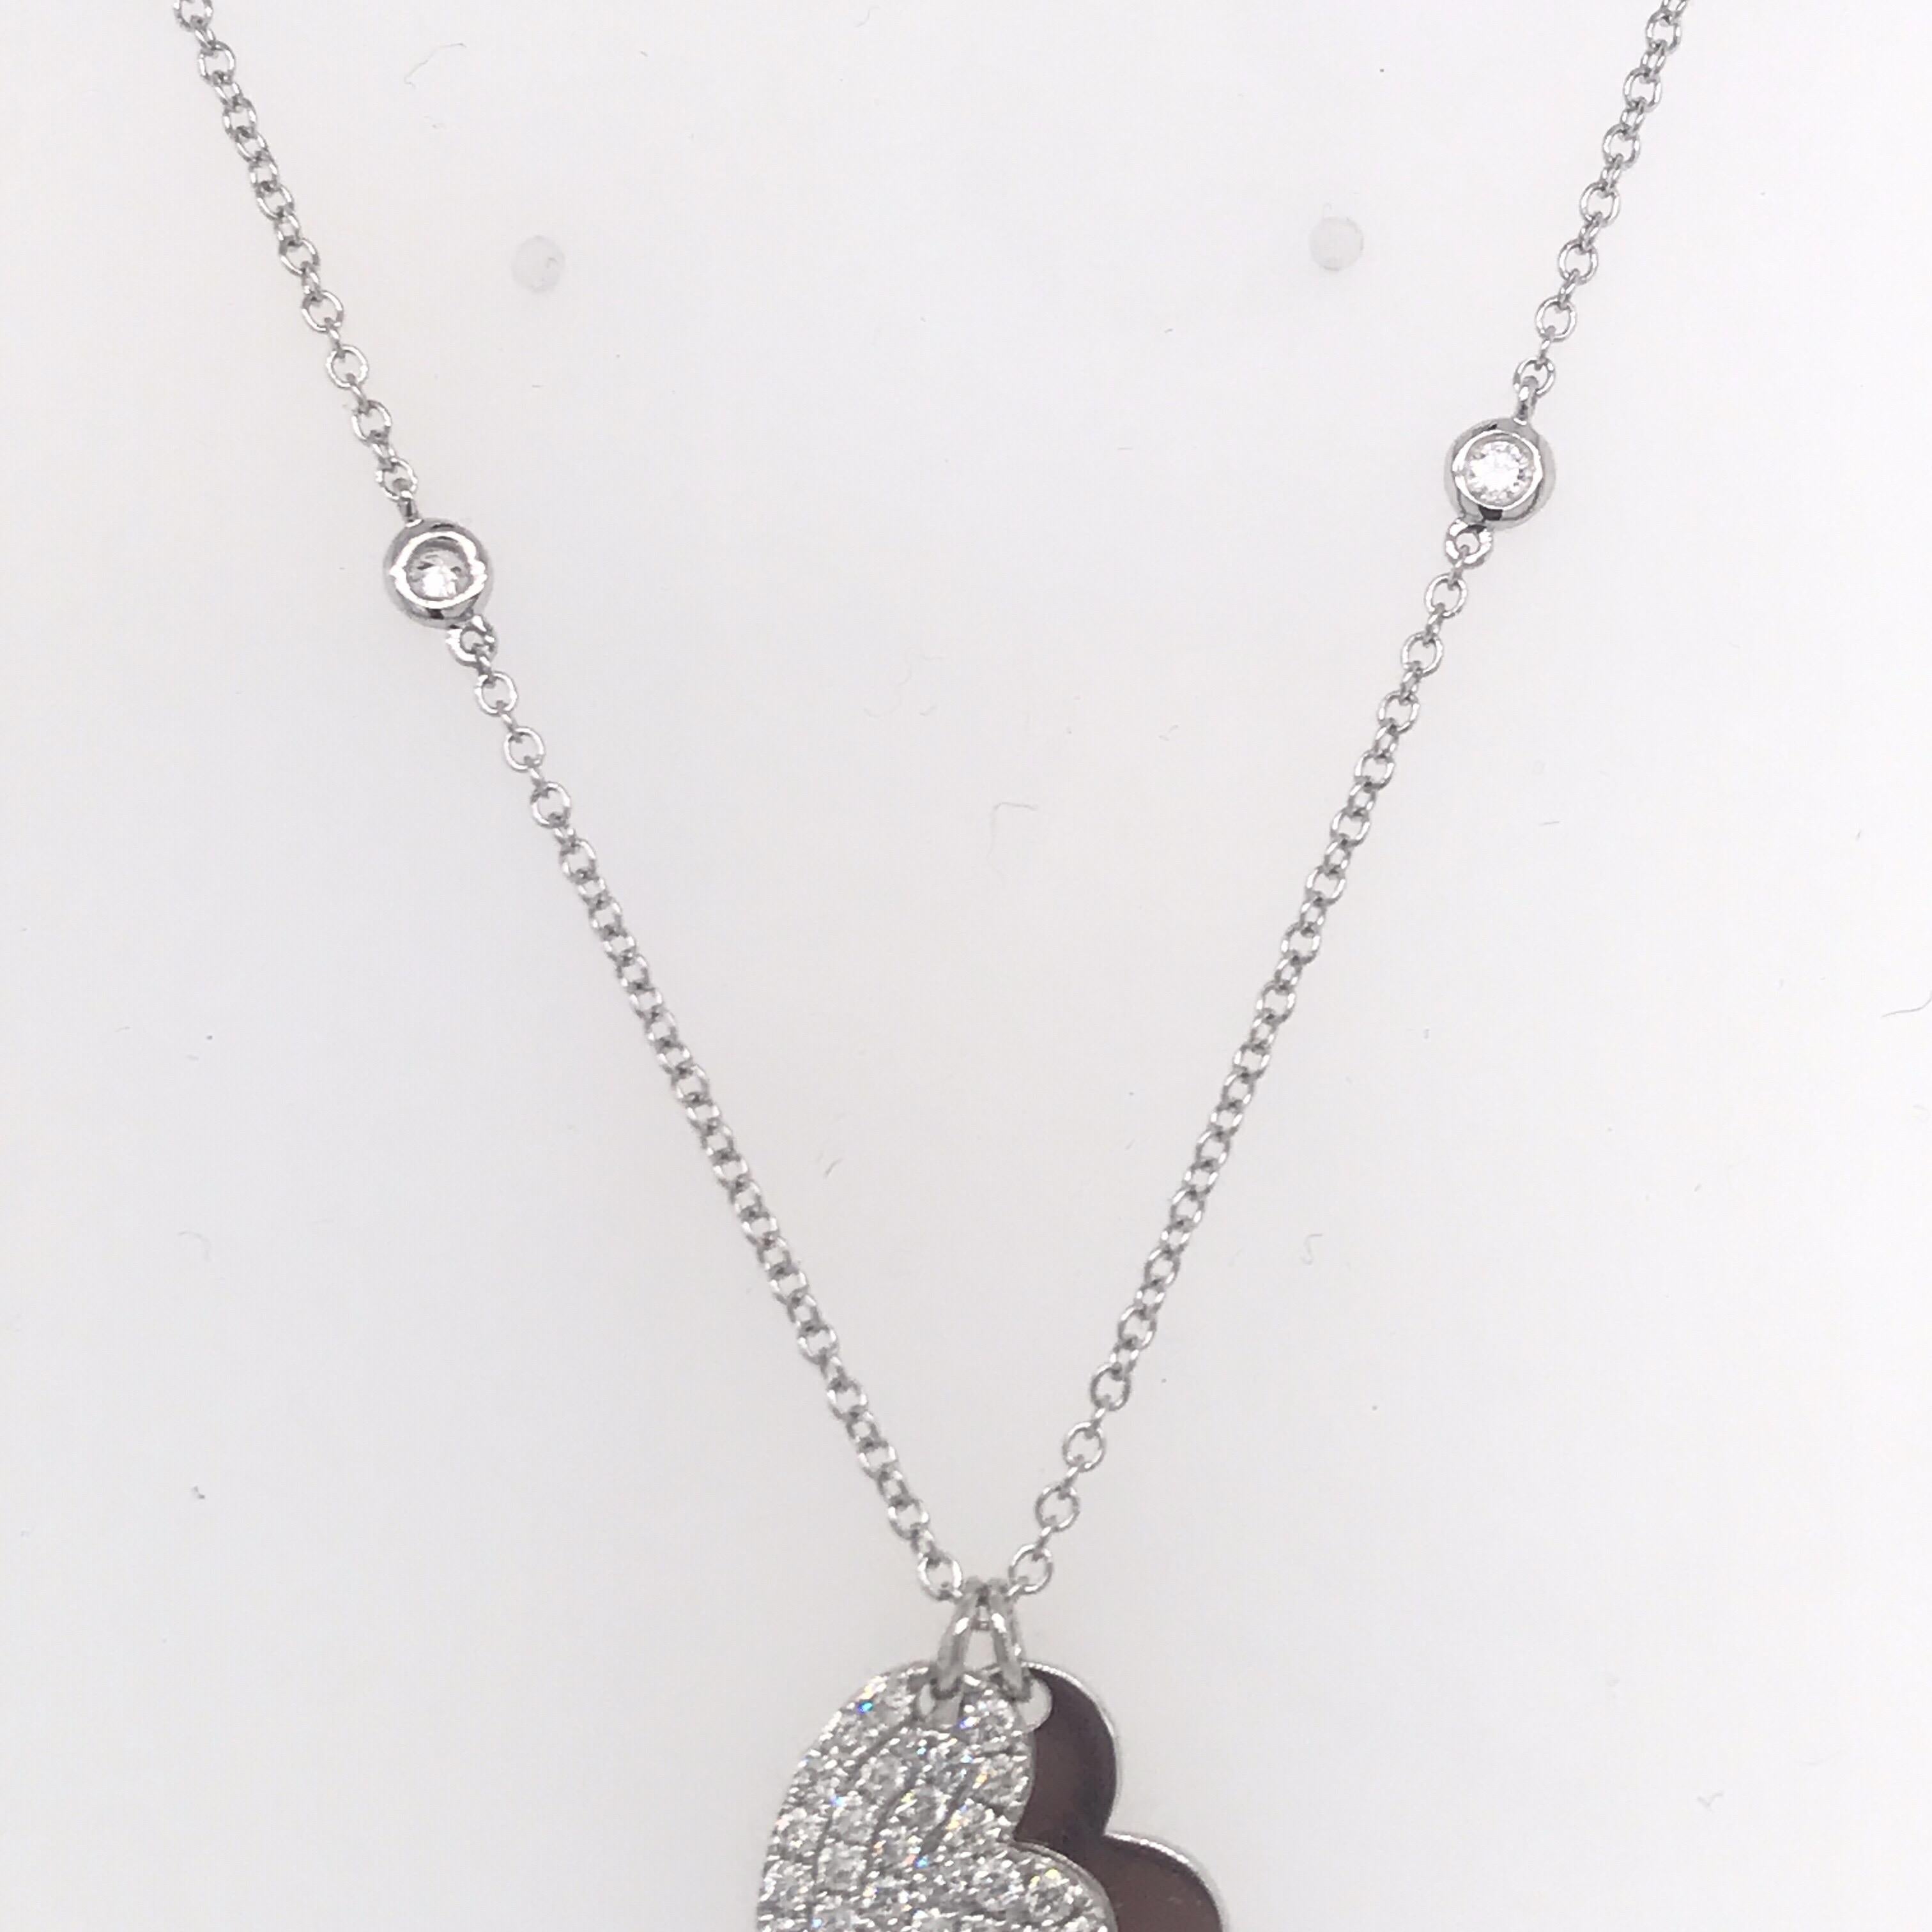 18K White gold pendant featuring two hearts, one solid white gold, and a diamond heart with 39 diamonds weighing 0.52 carats.
Solid heart can be engraved!
Color G-H
Clarity SI